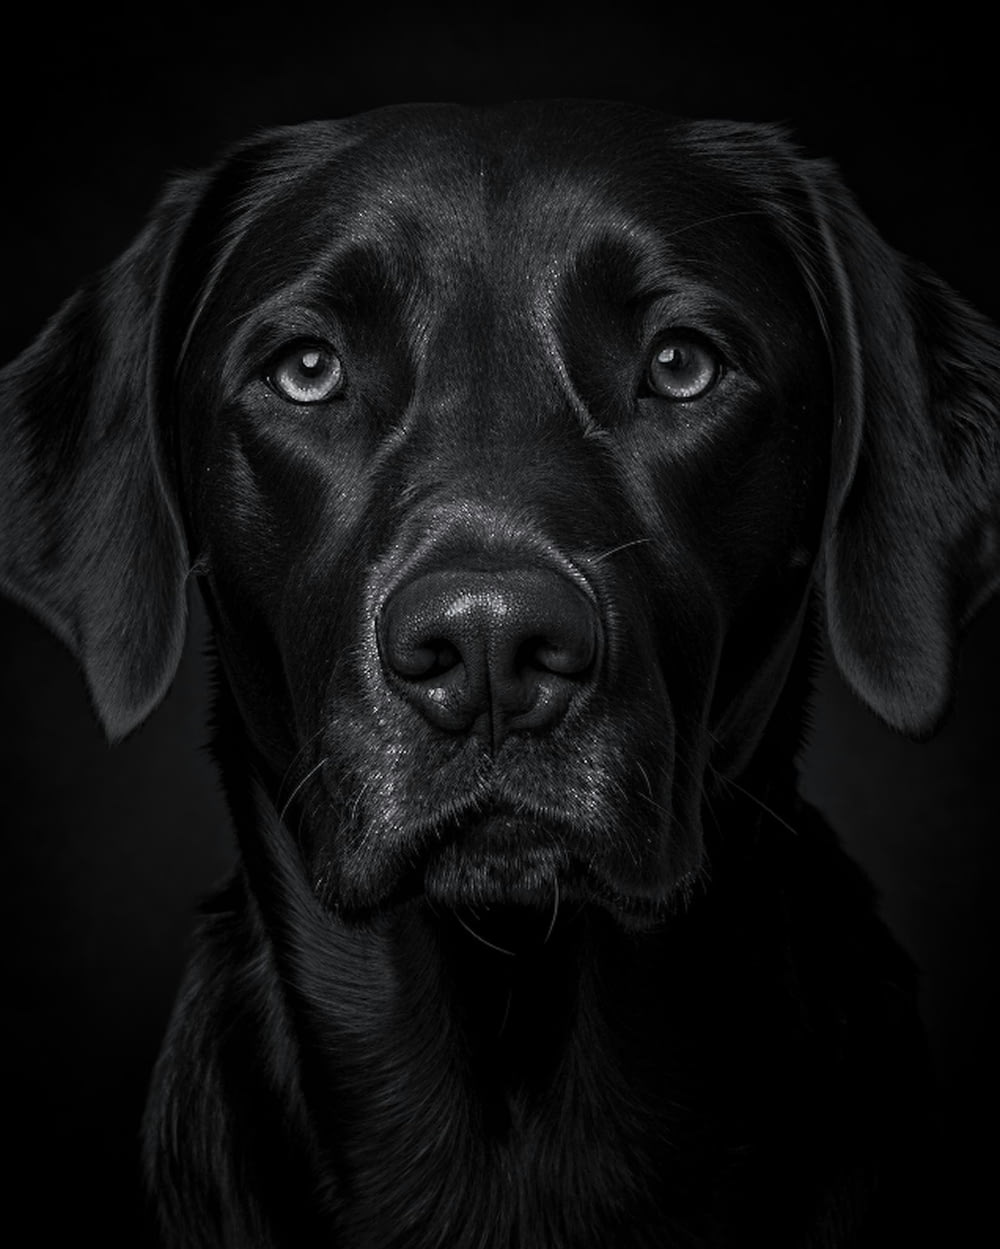 a close up of a black dog's face